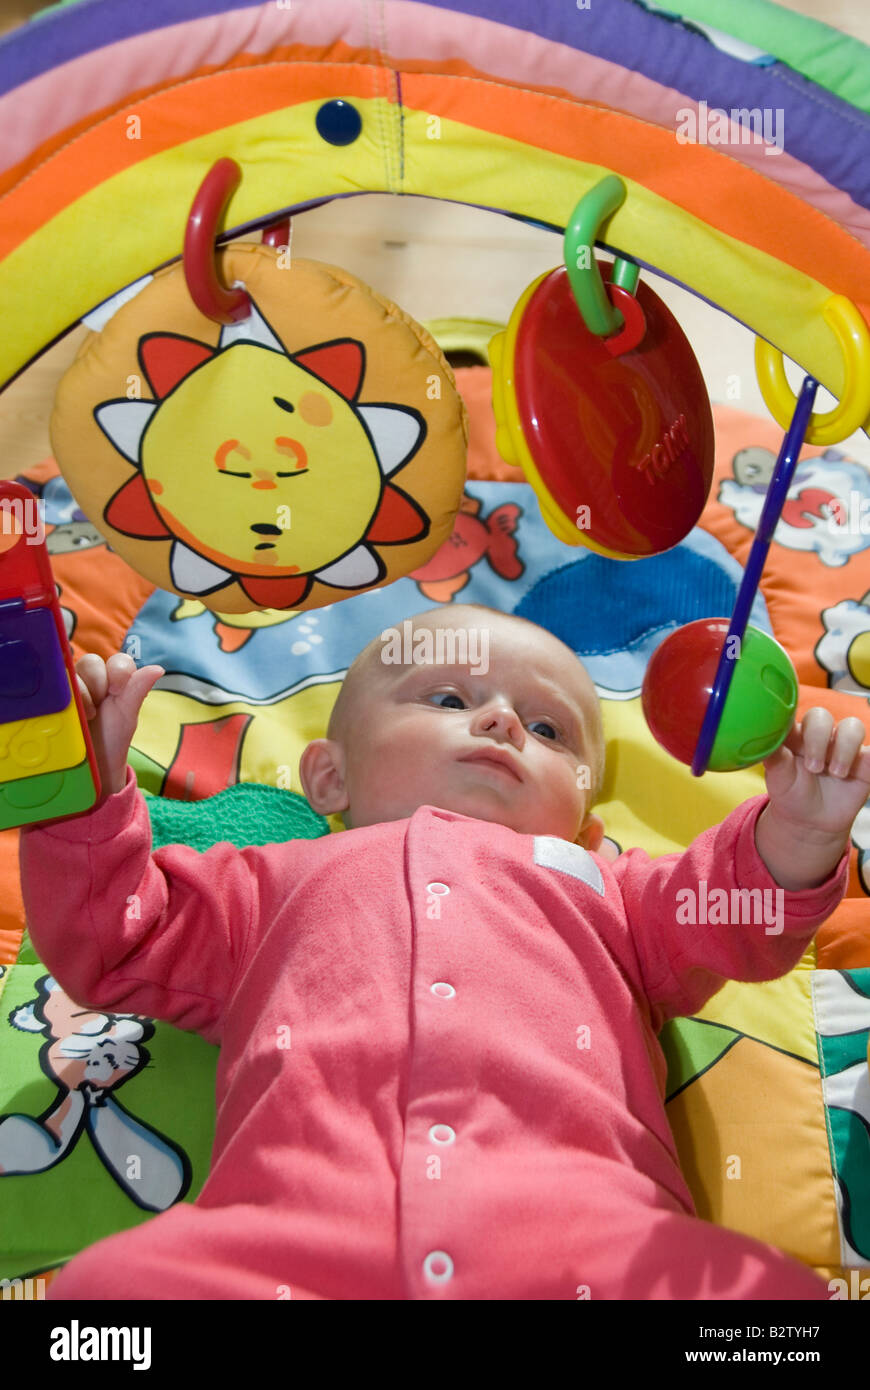 Baby Boy Joshua Kailas Hudson Aged 15 Weeks Playing with Hanging Rattle of his Colourful Toy Baby Gym Stock Photo